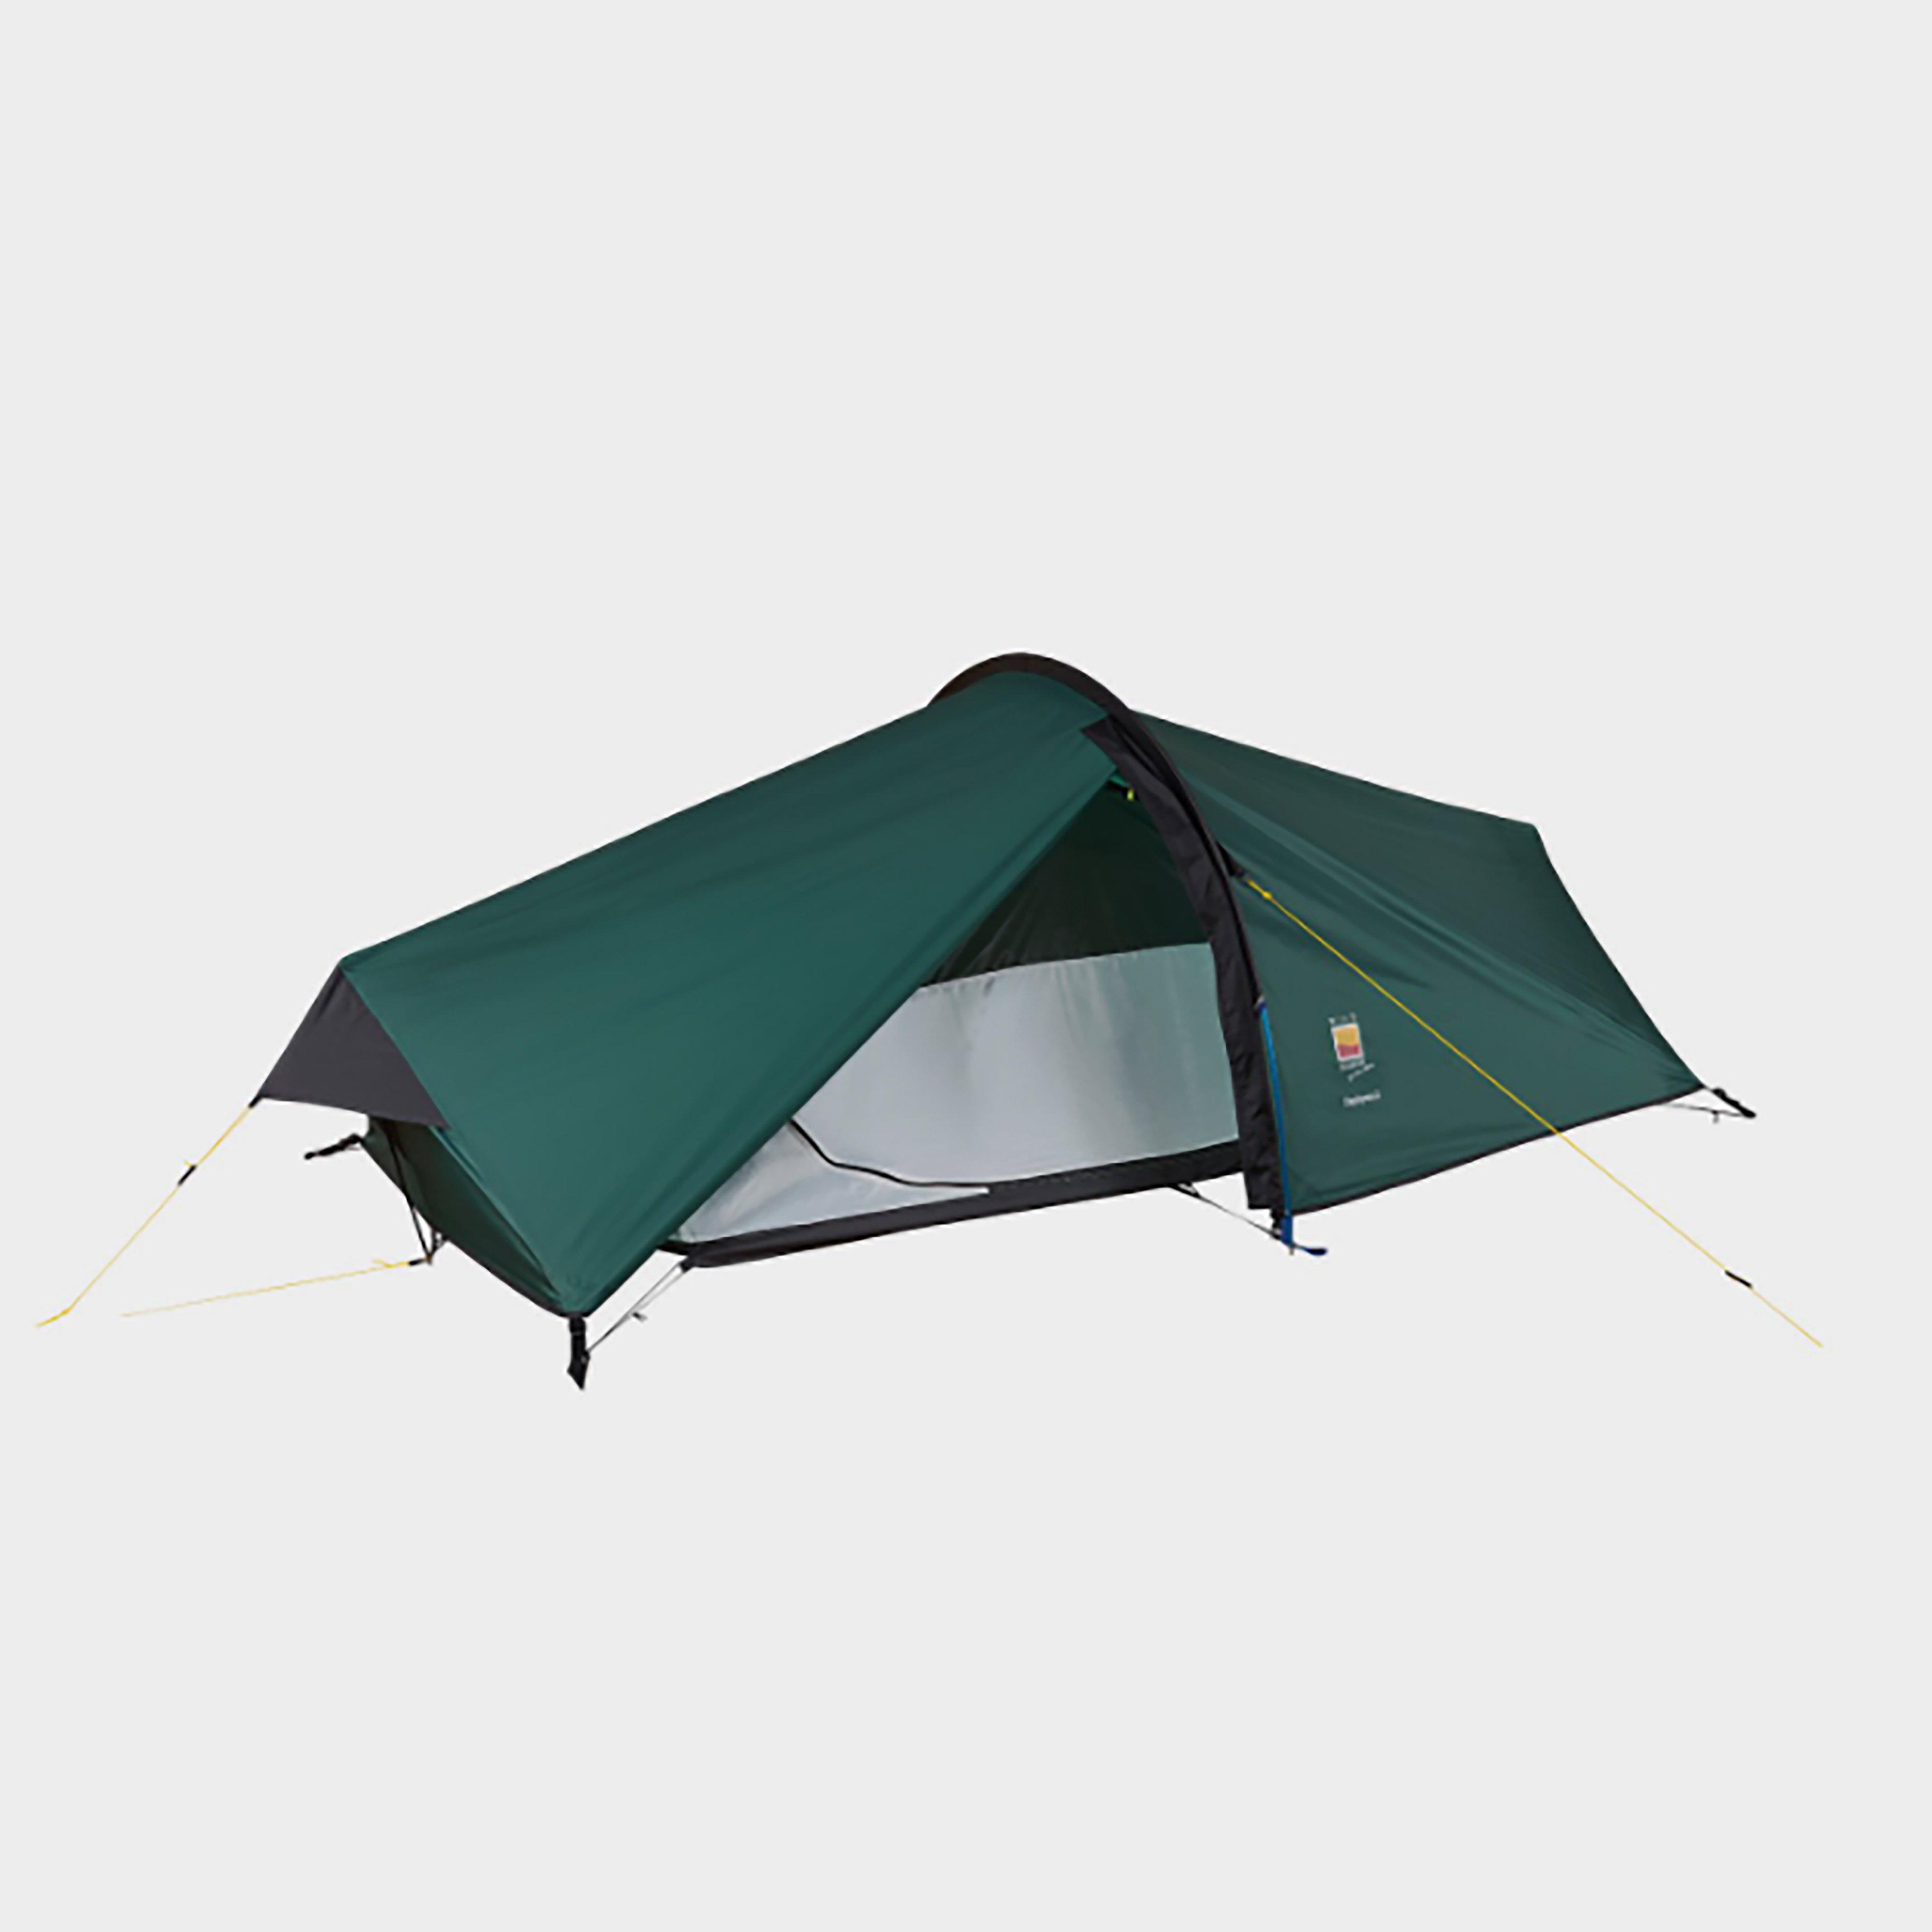 Wild Country Wild Country Zephyros Compact 2 Tent - Green, GREEN